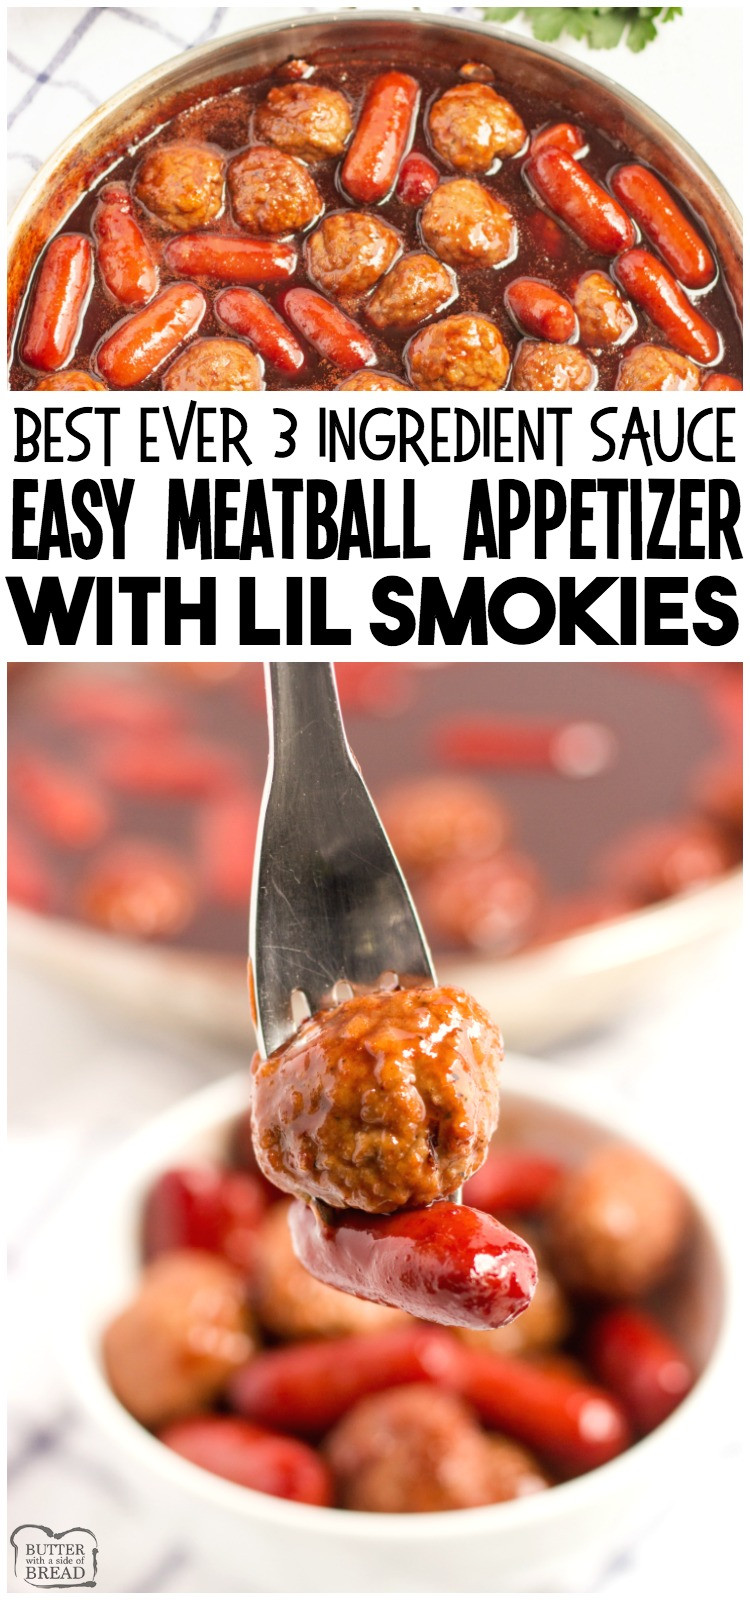 Sauces For Appetizer Meatballs
 EASY LIL SMOKIES & MEATBALL APPETIZER Butter with a Side